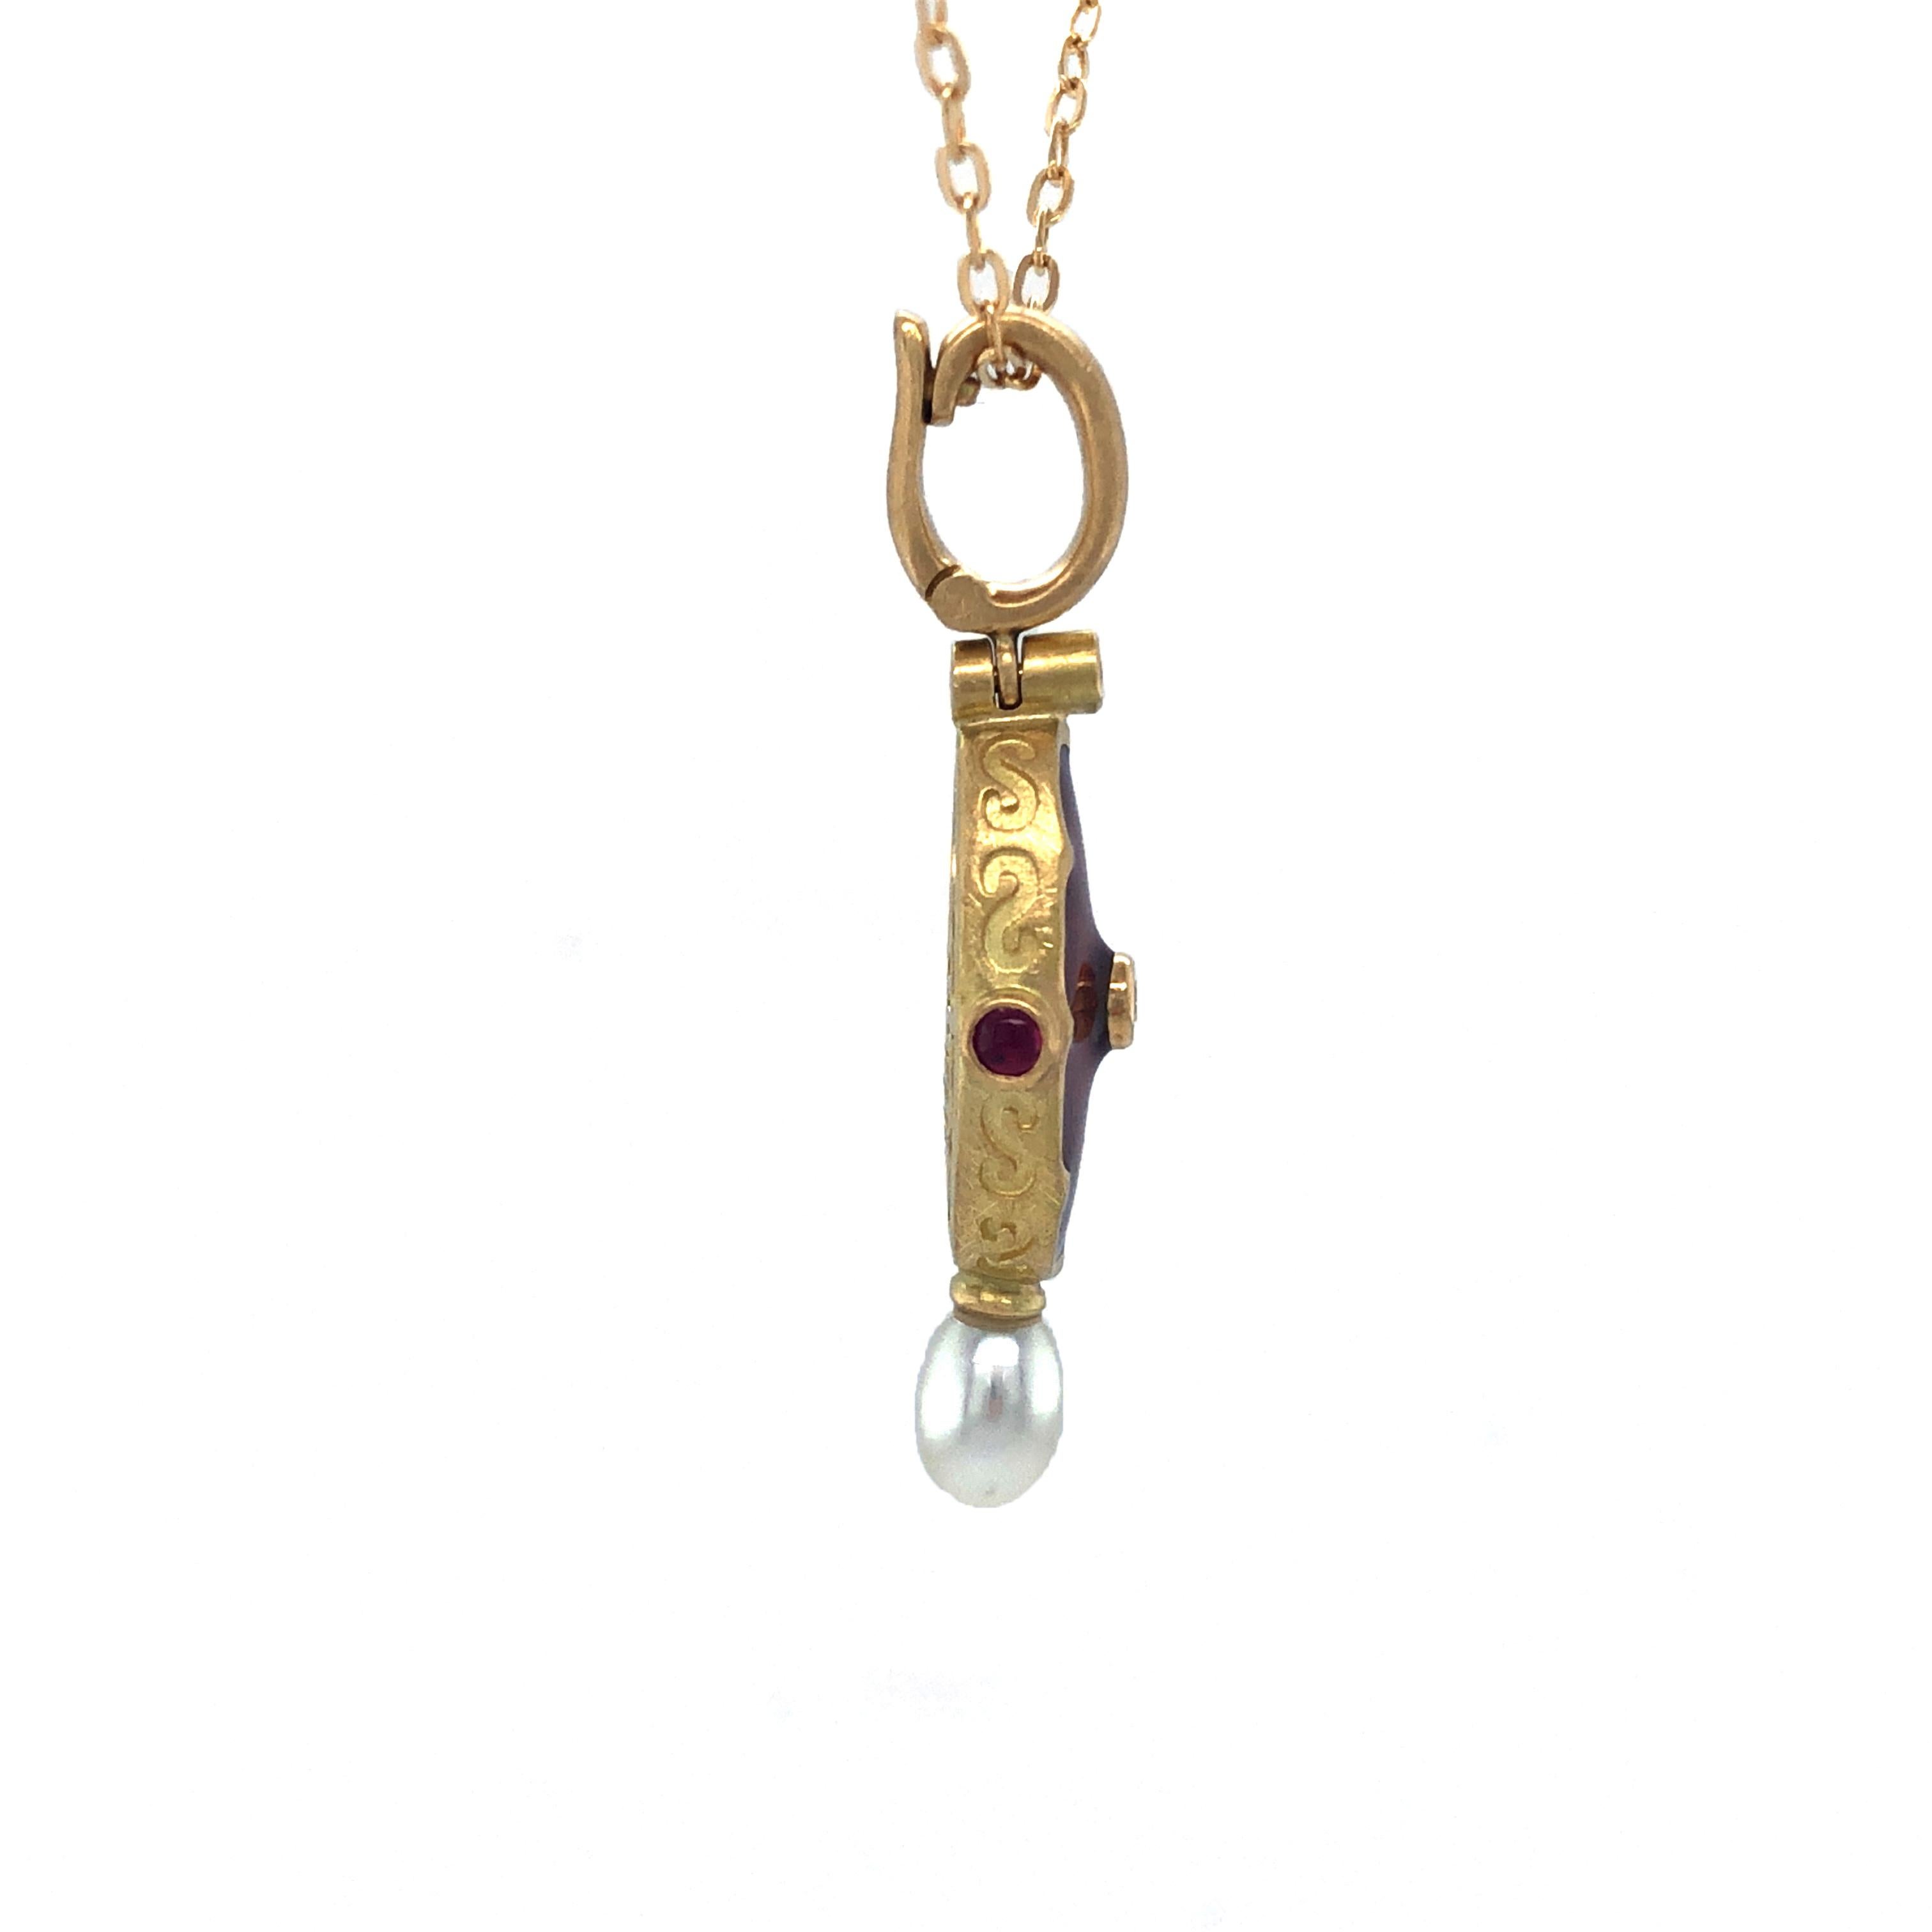 Renaissance Revival Oval Pendant Necklace 18k Yellow Gold Red Enamel 2 Rubies 1 Pearl 2 Star Paillon For Sale